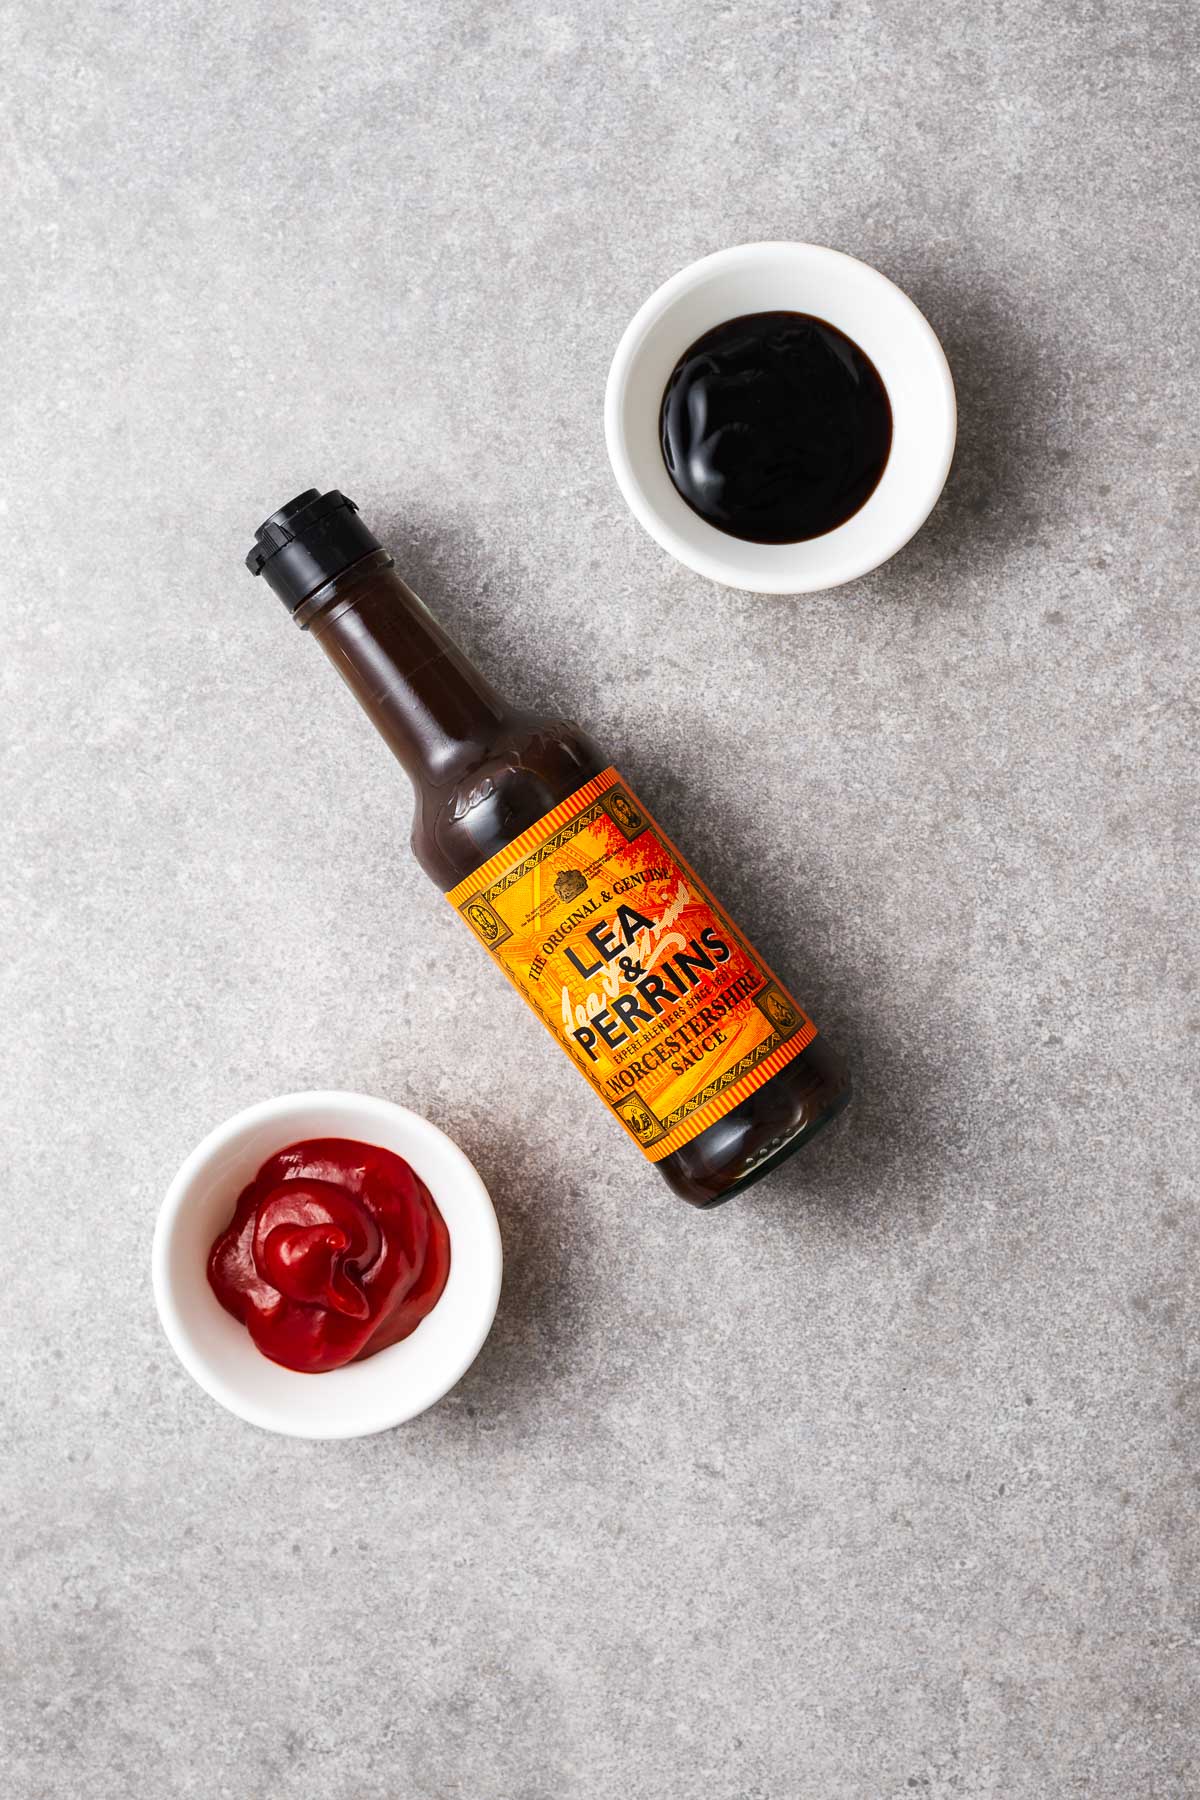 A bottle of Lea & Perrins Worcestershire sauce with two small bowls holding tomato ketchup and sweet soy sauce.